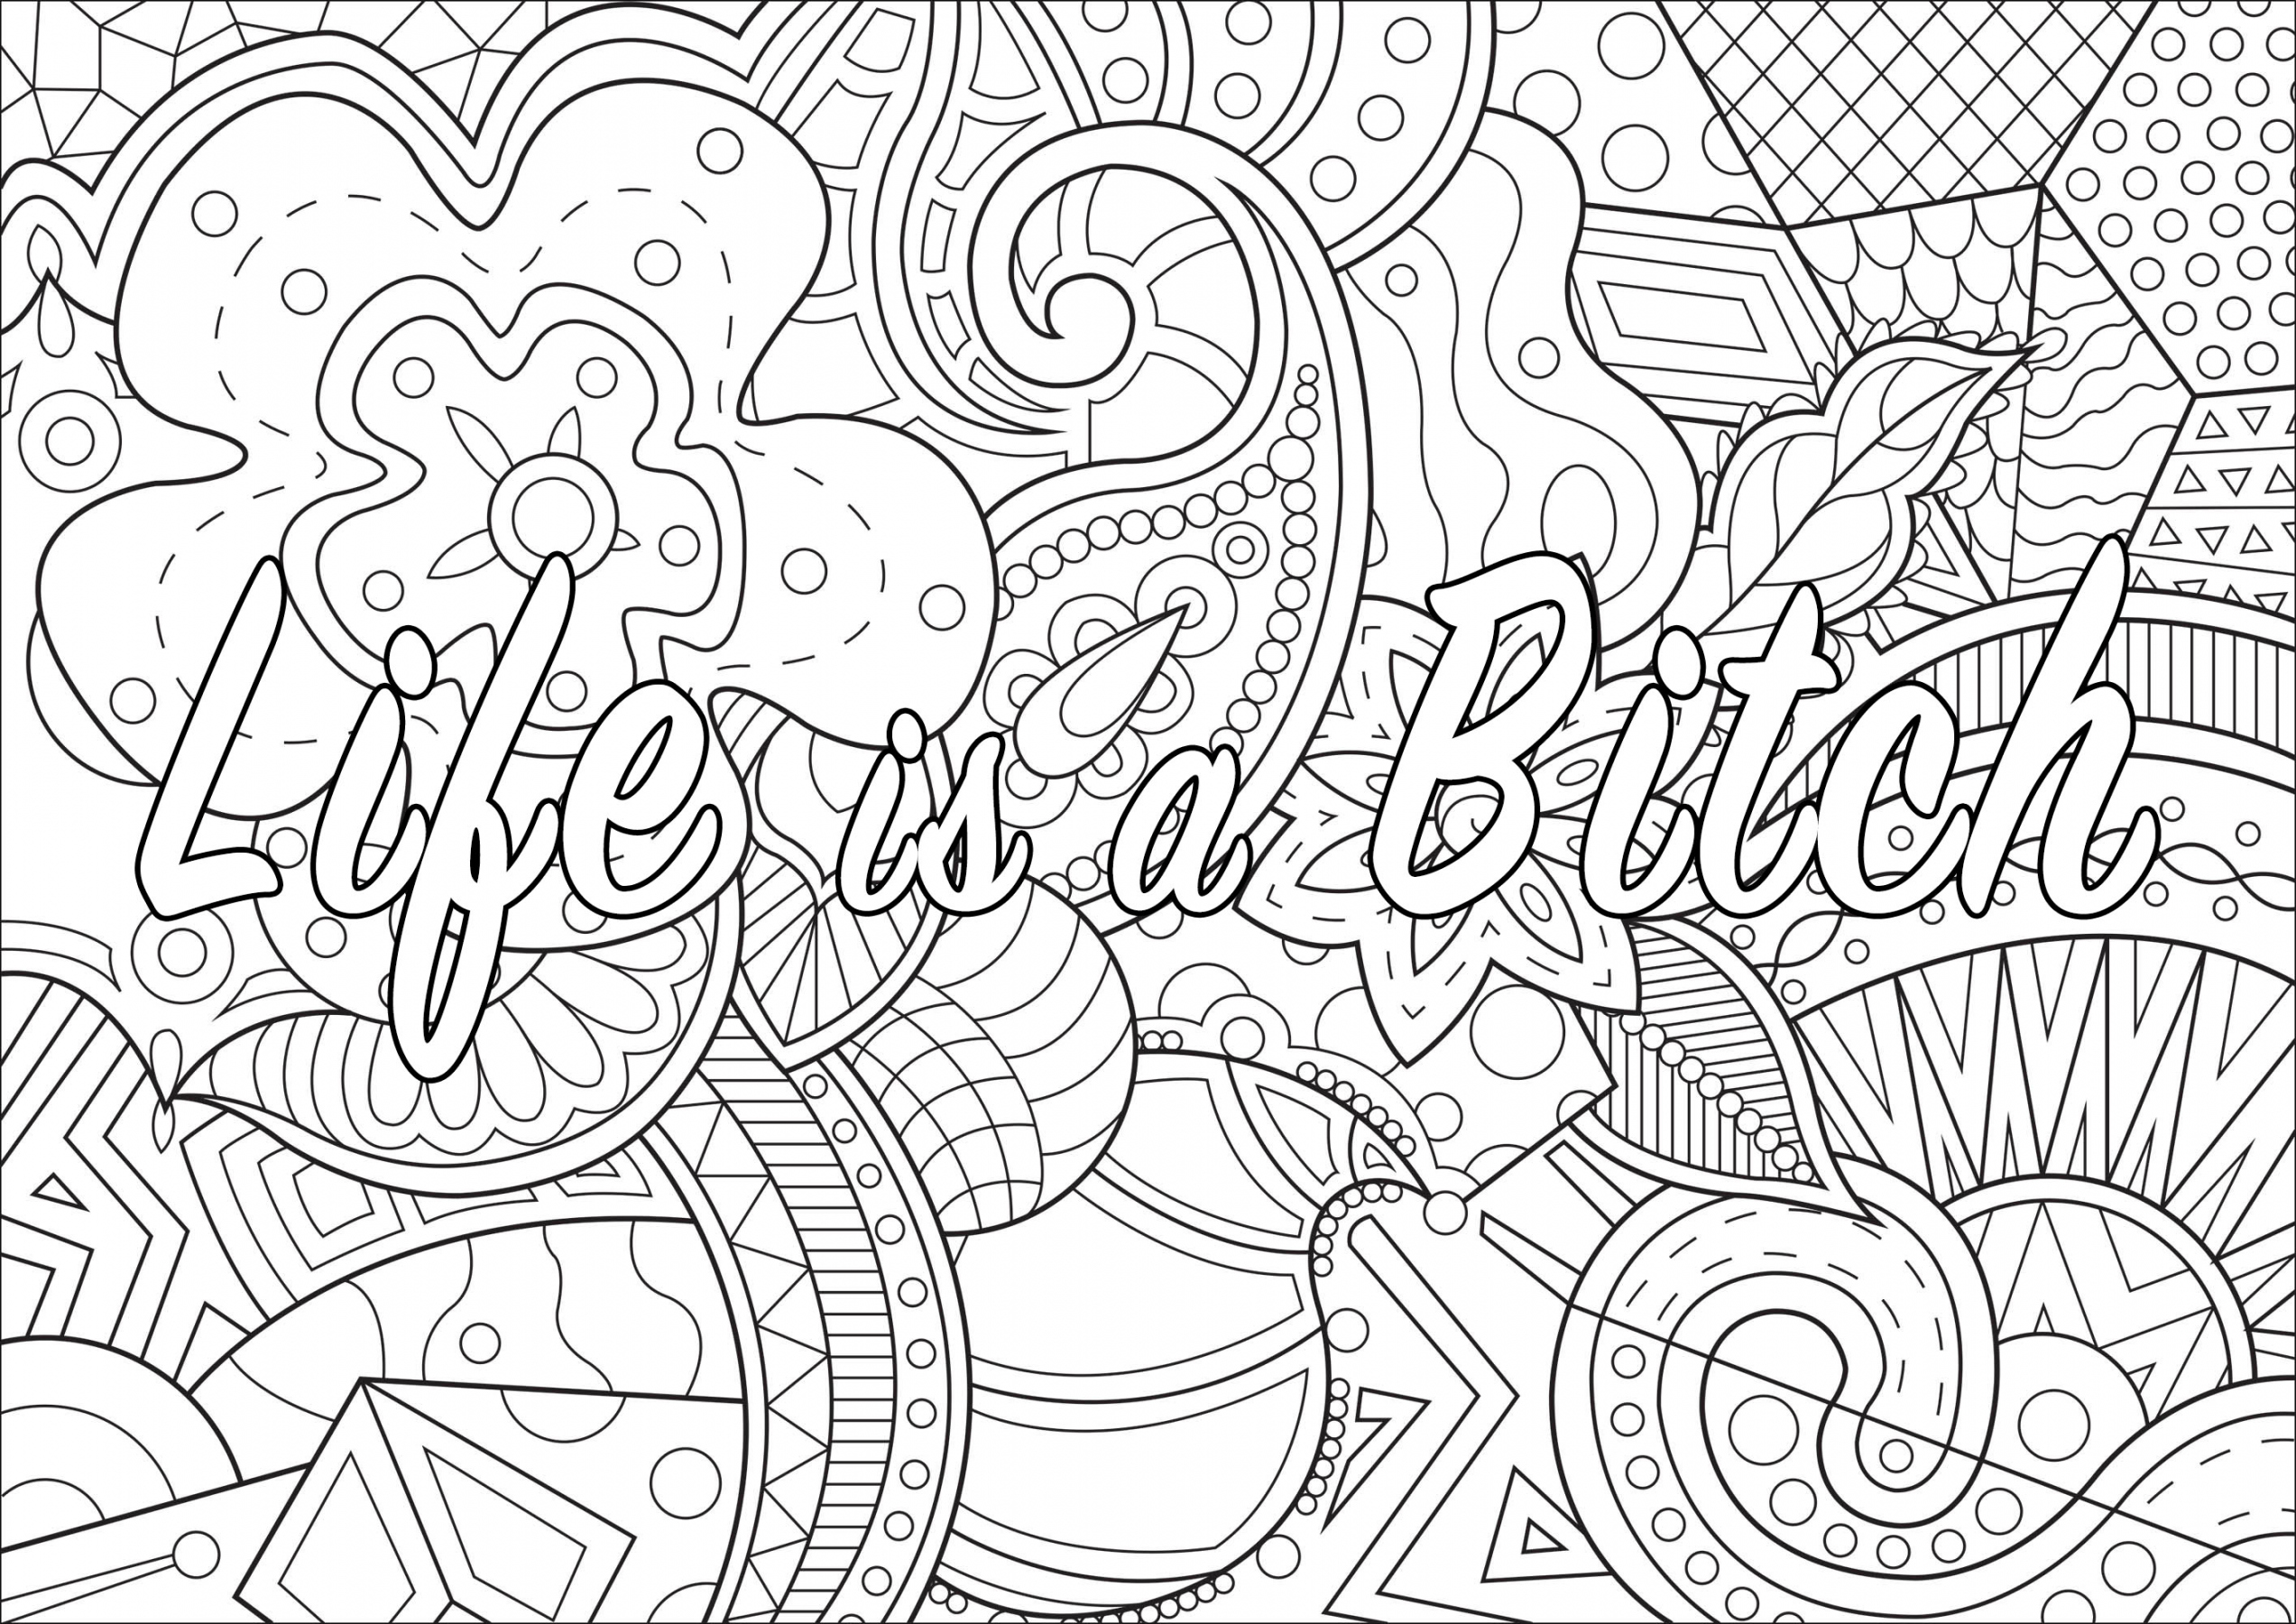 Life is a Bitch (Swear word coloring page) - Swear word Adult  - FREE Printables - Free Printable Coloring Pages For Adults Only Swear Words